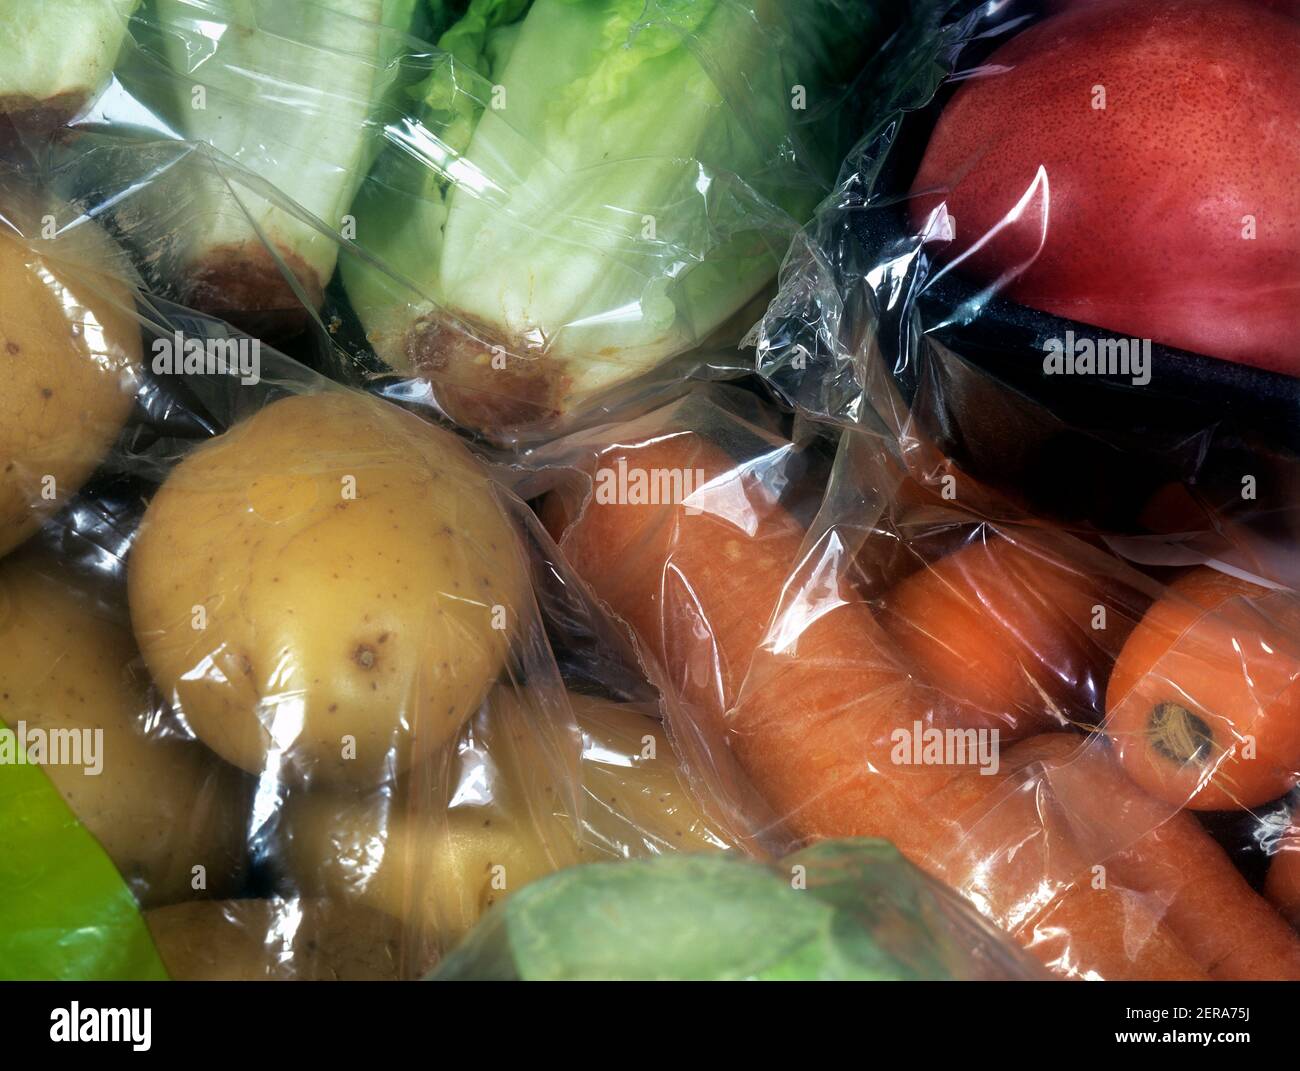 Unnecessary packaging - clear plastic bag and cellophane wrapping on vegetables sold in a supermarket (including potatoes, carrots and lettuce). Stock Photo